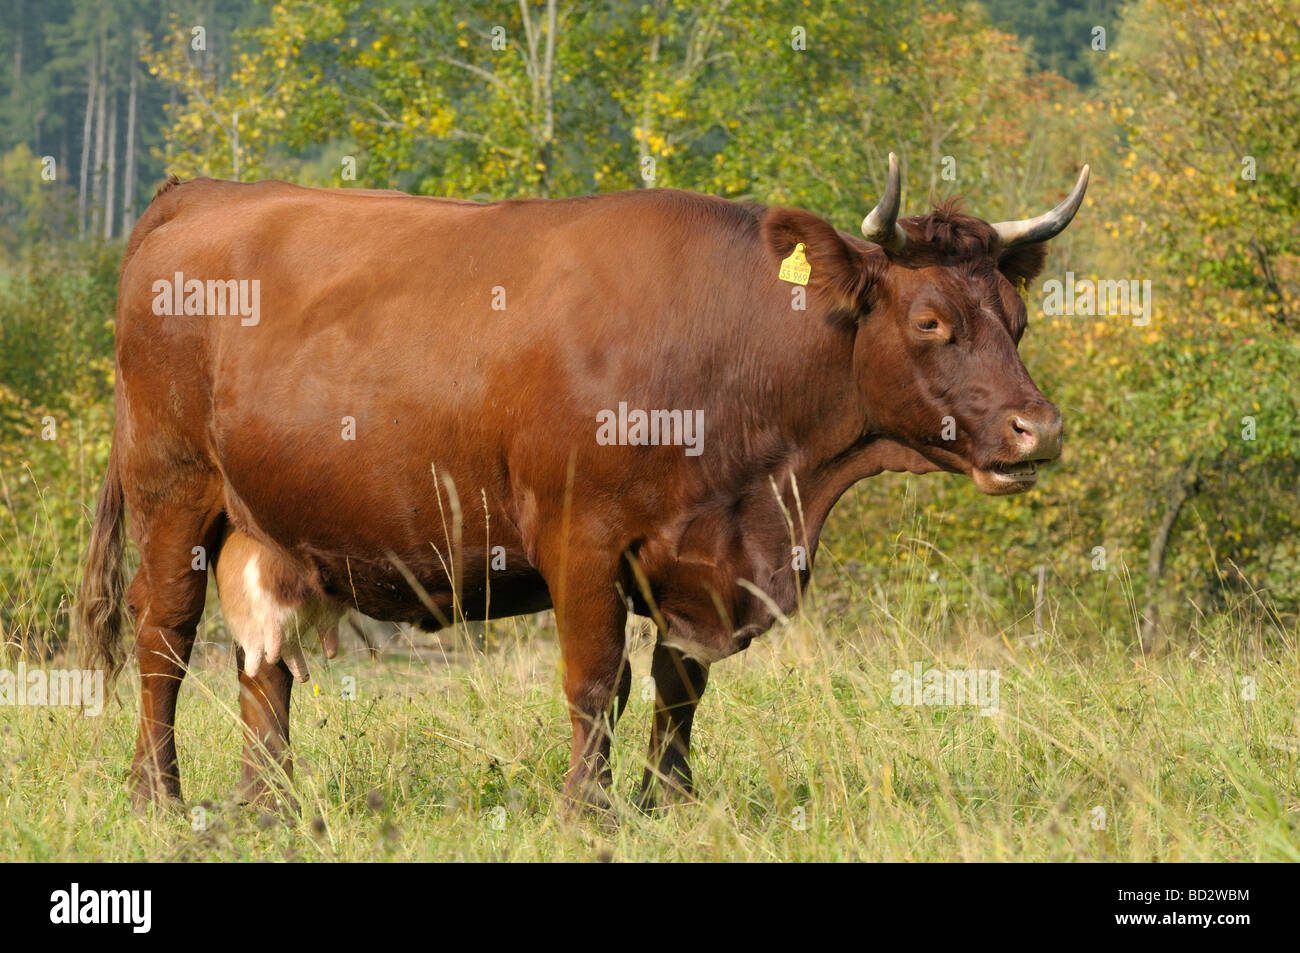 Domestic Cattle (Bos primigenius, Bos taurus), breed: German Red Hill Cattle. Cow on a pasture Stock Photo